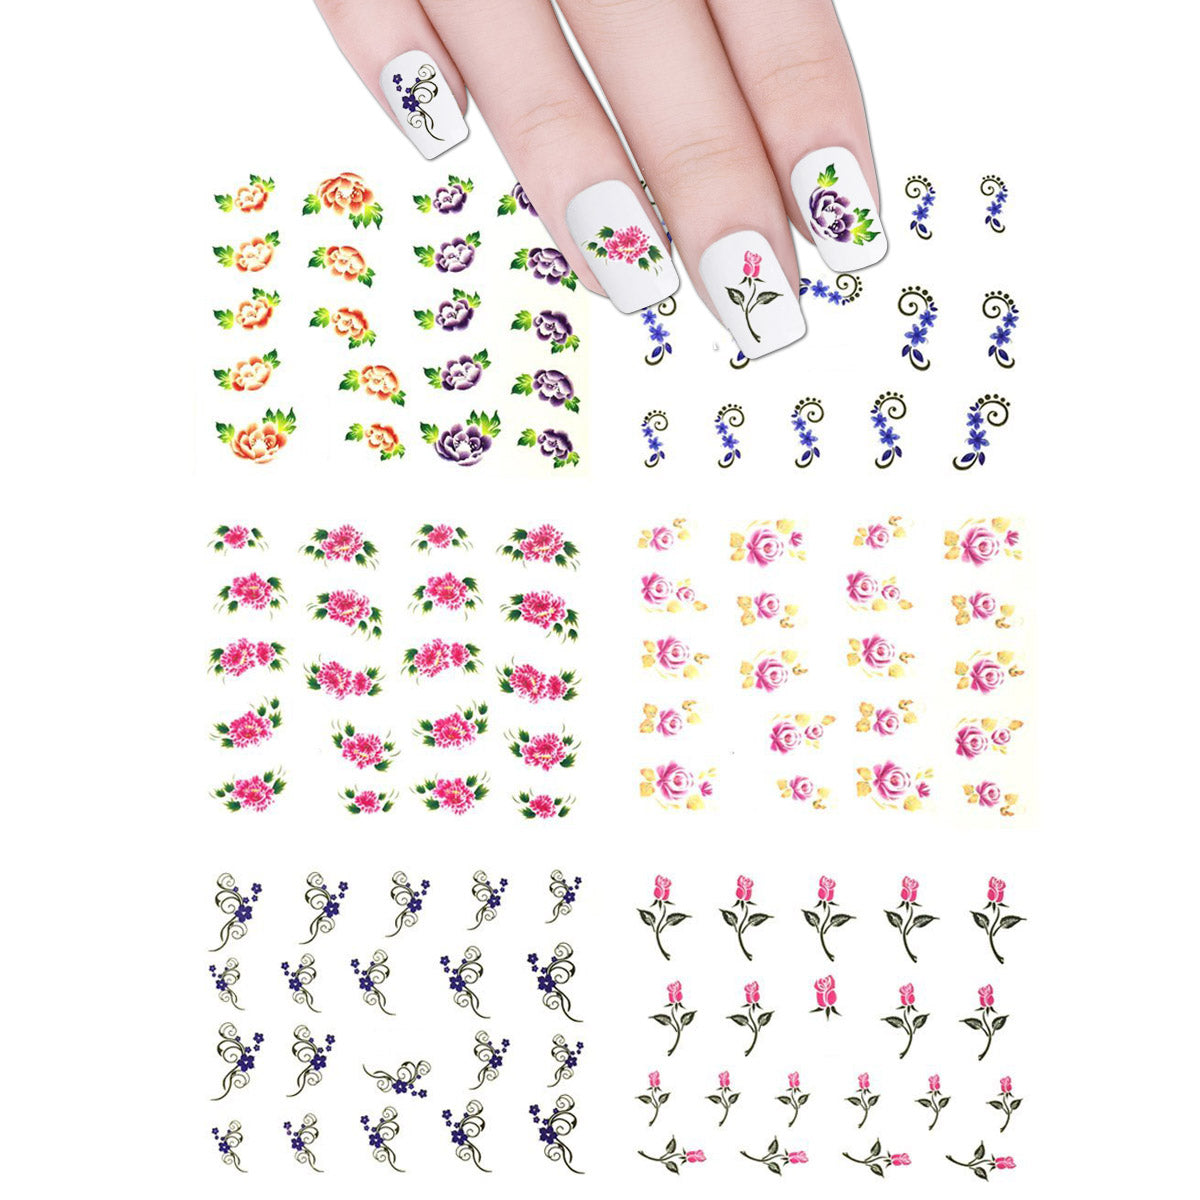 Amazon.com: Spring Floral Nail Stickers Mix Flowers Leaf Butterfly Water  Decals Sliders with Geometric Lines Floret Elegant Nail Art Design Manicure  Decoration Summer Nail Art Supplies 12pcs/Sheet : Beauty & Personal Care